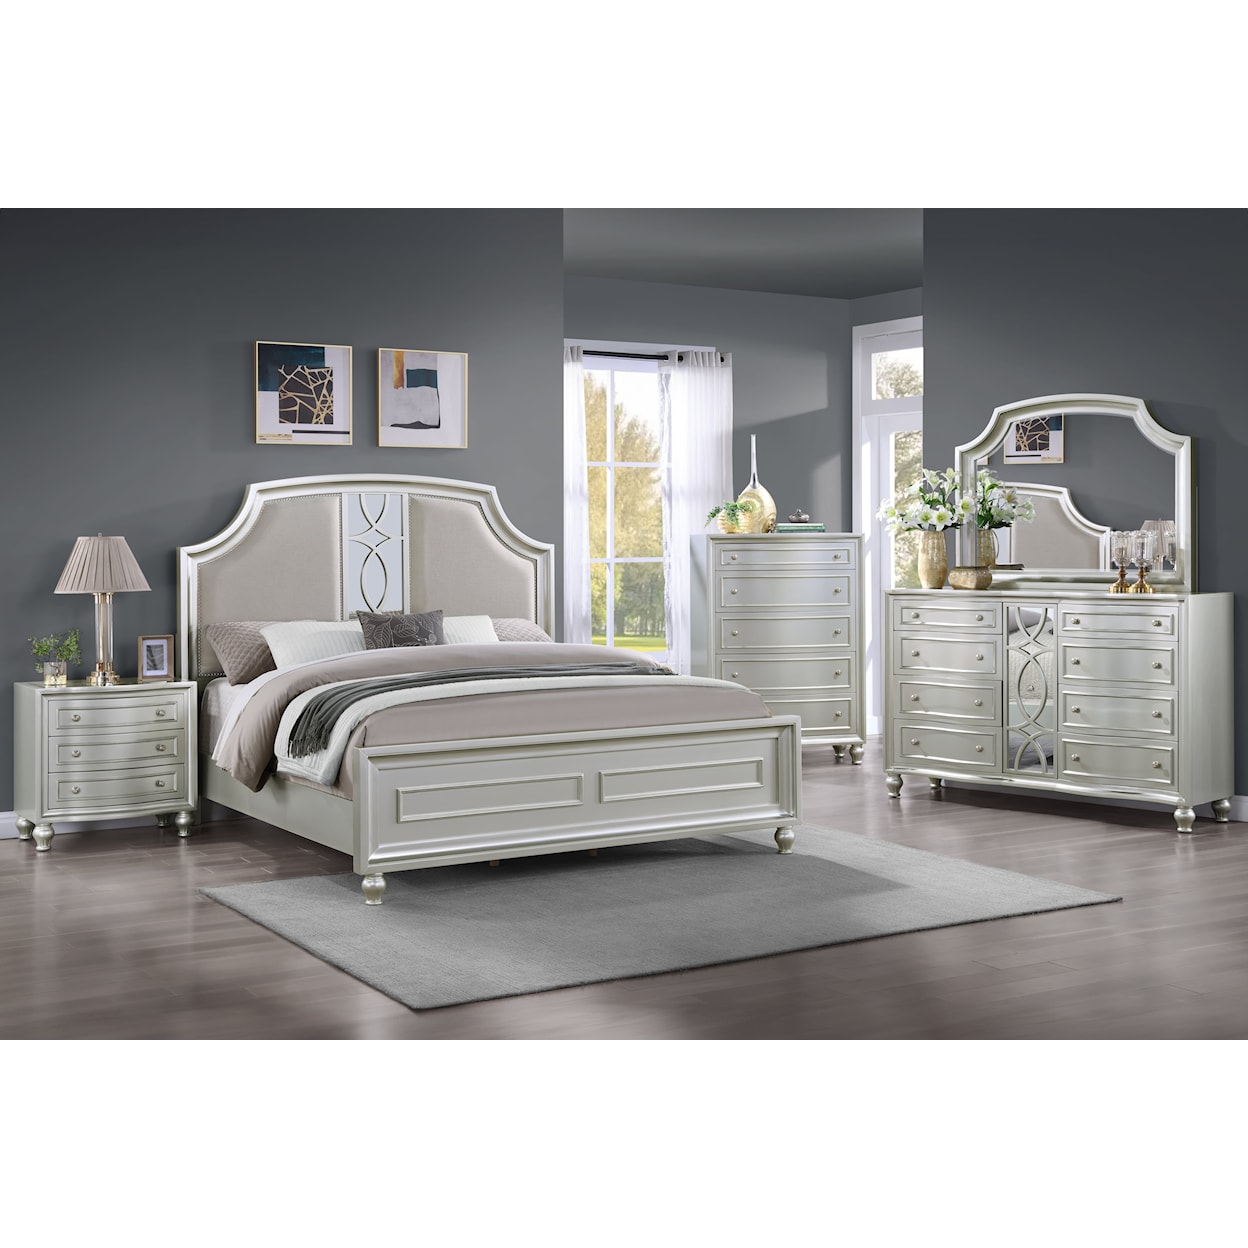 New Classic Reflections King Bed